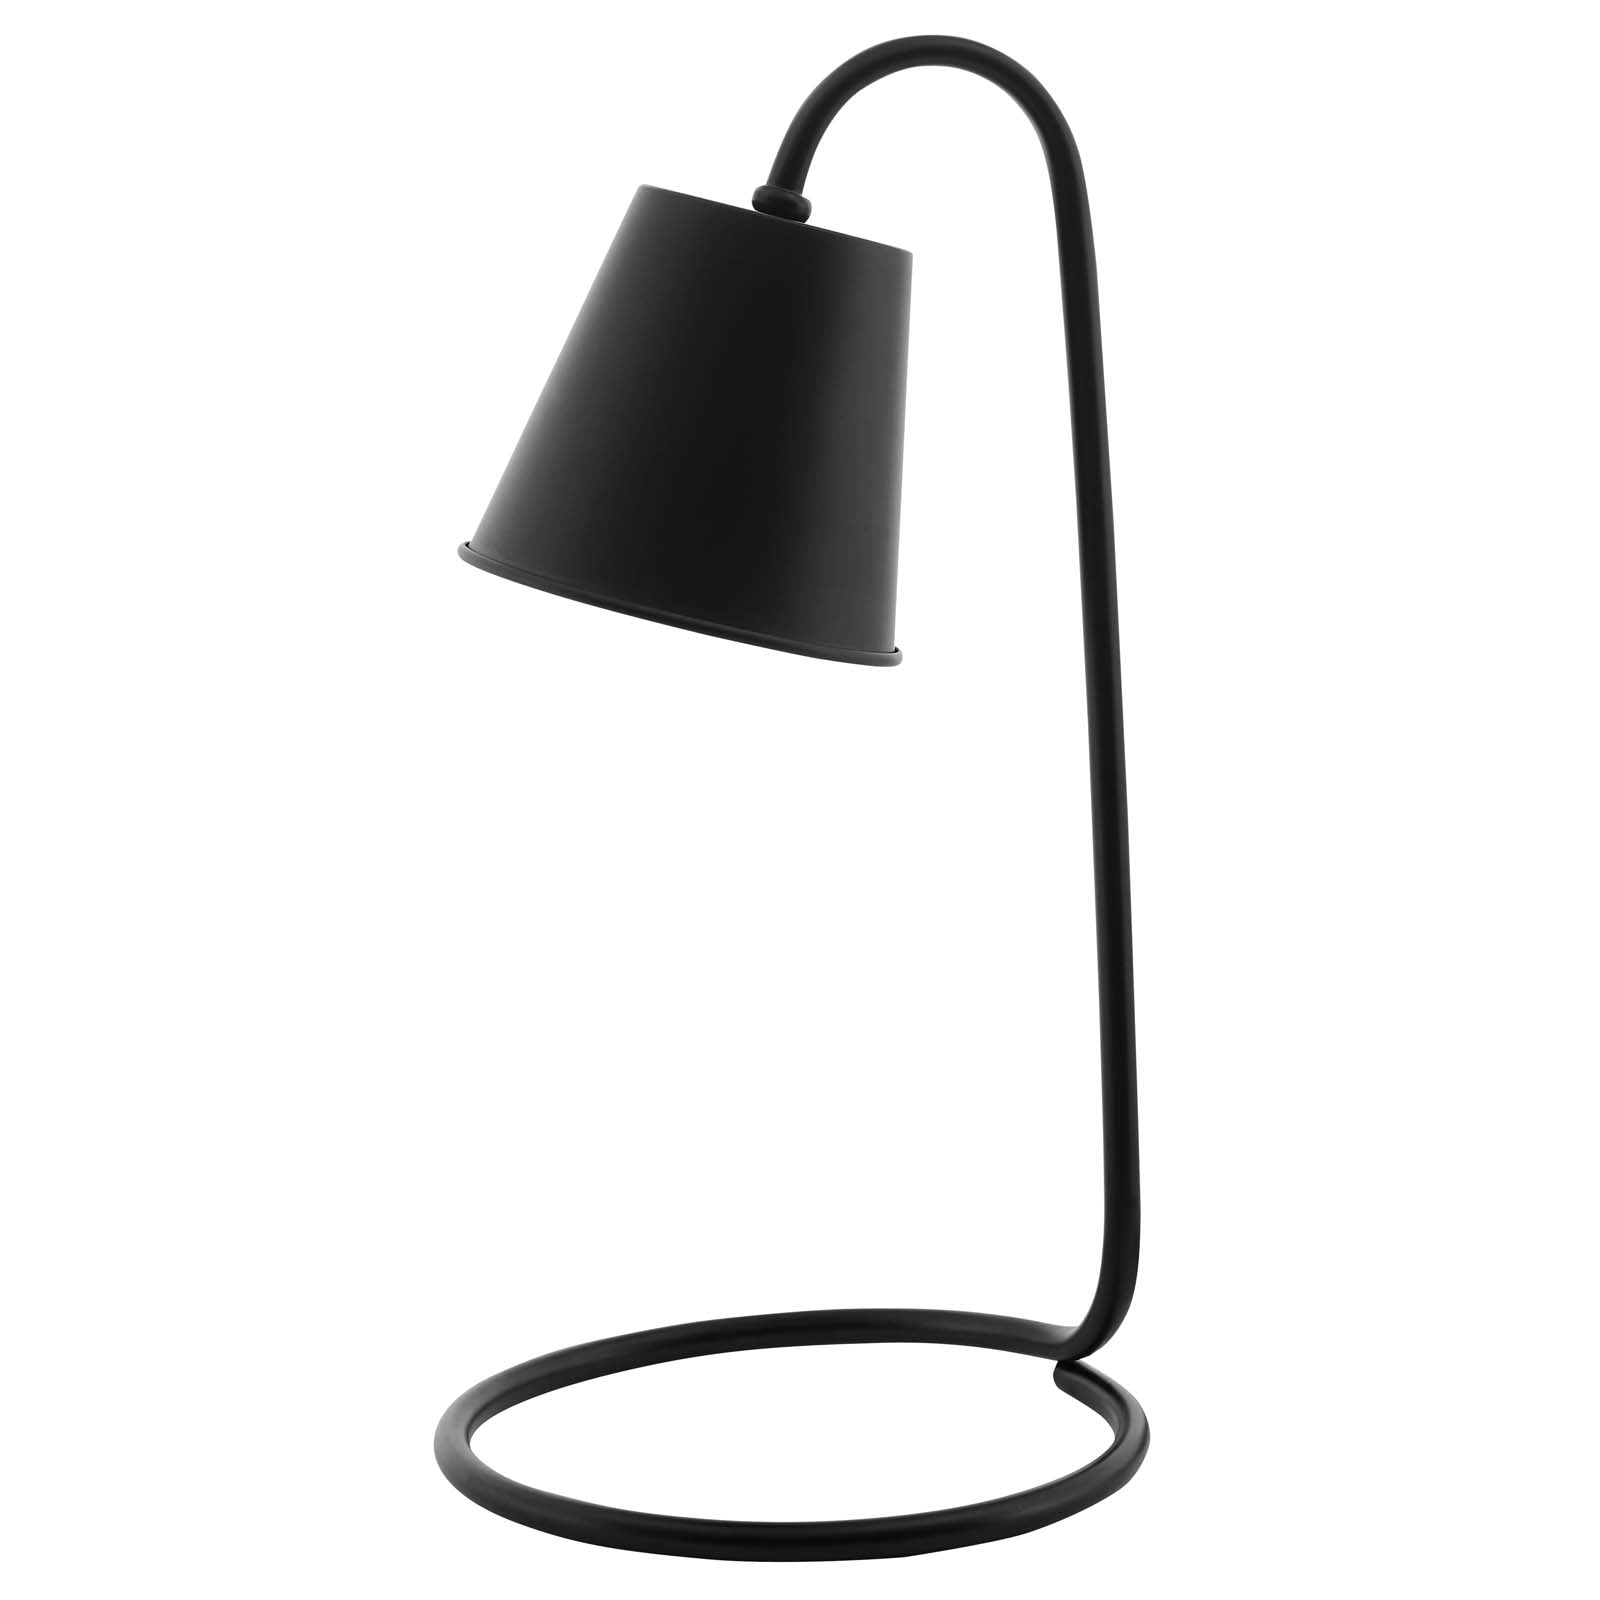 Modway Table Lamps - Proclaim Metal Table Lamp Black